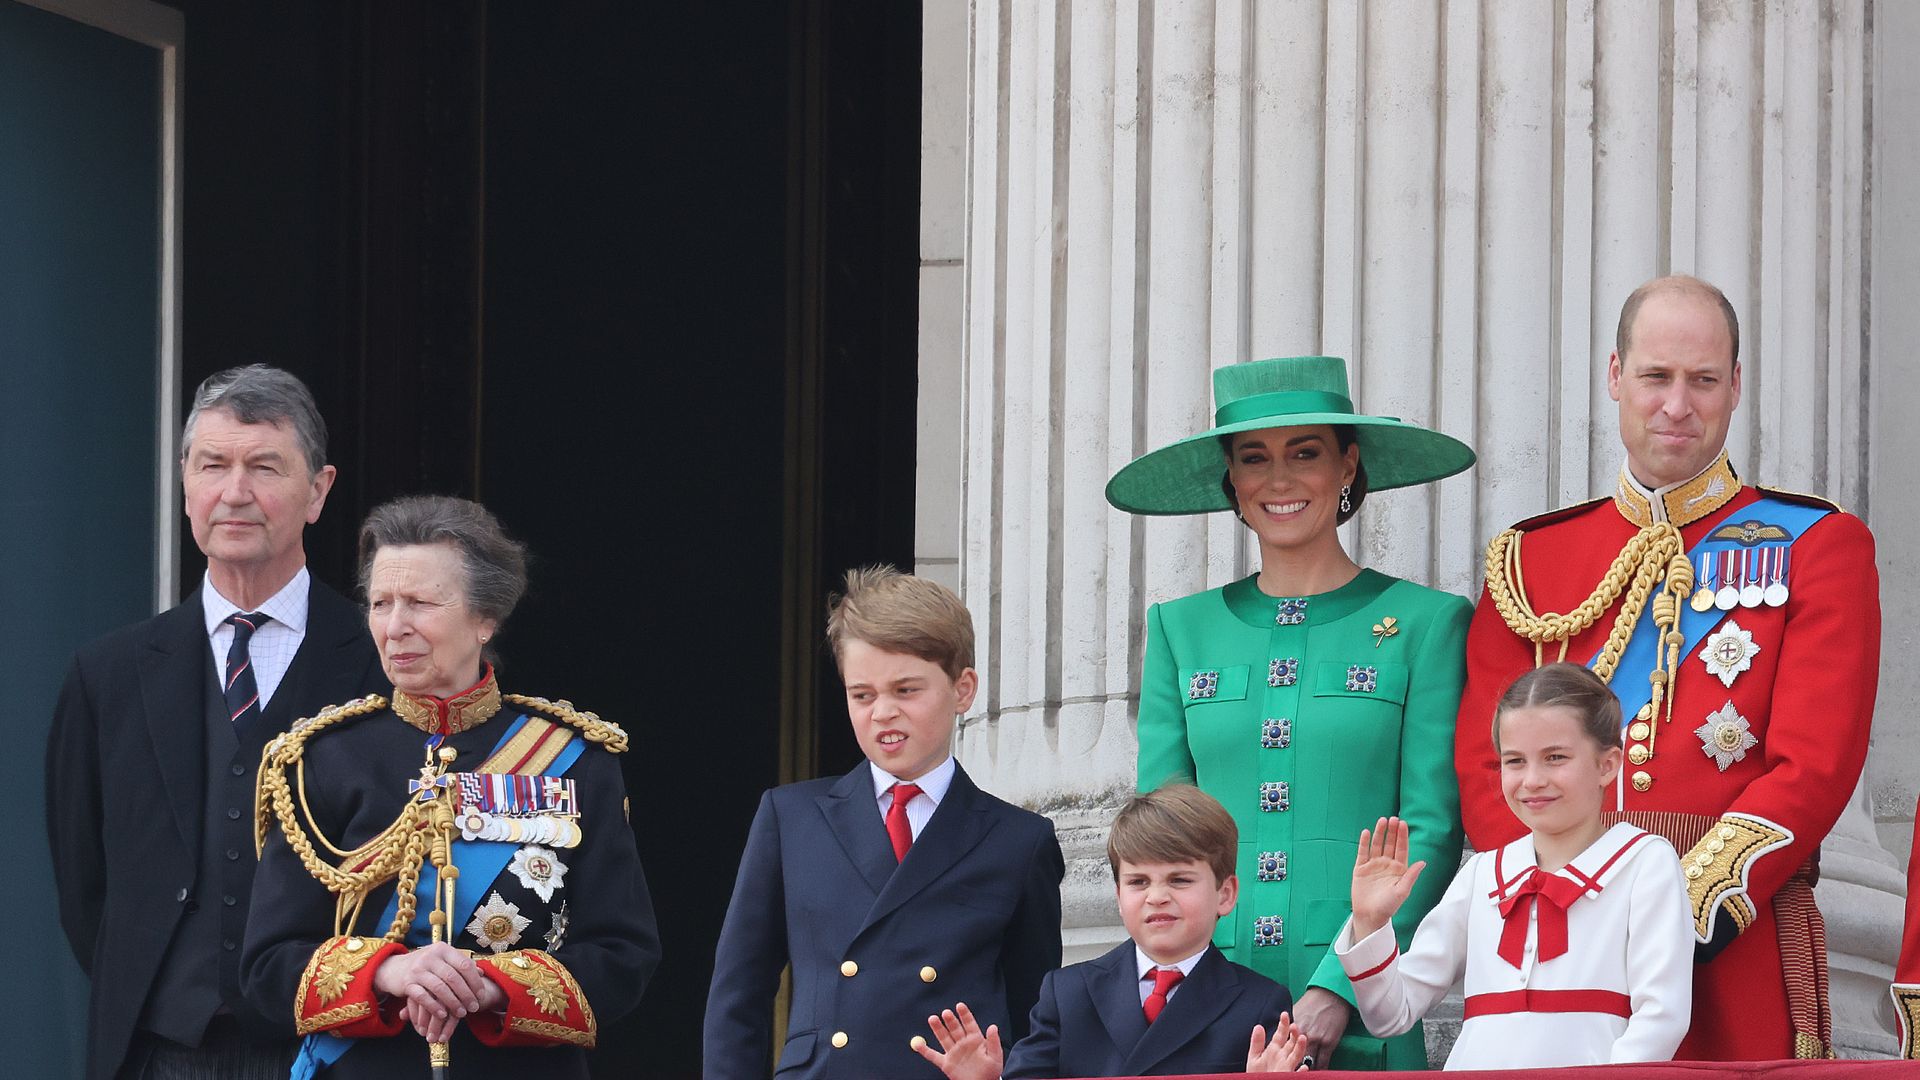 Sir Timothy Lawrence, Princess Anne, Princess Royal, Prince George of Wales, Prince Louis of Wales, Princess Charlotte of Wales, Catherine, Princess of Wales, Prince William, Prince of Wales at Trooping the Colour